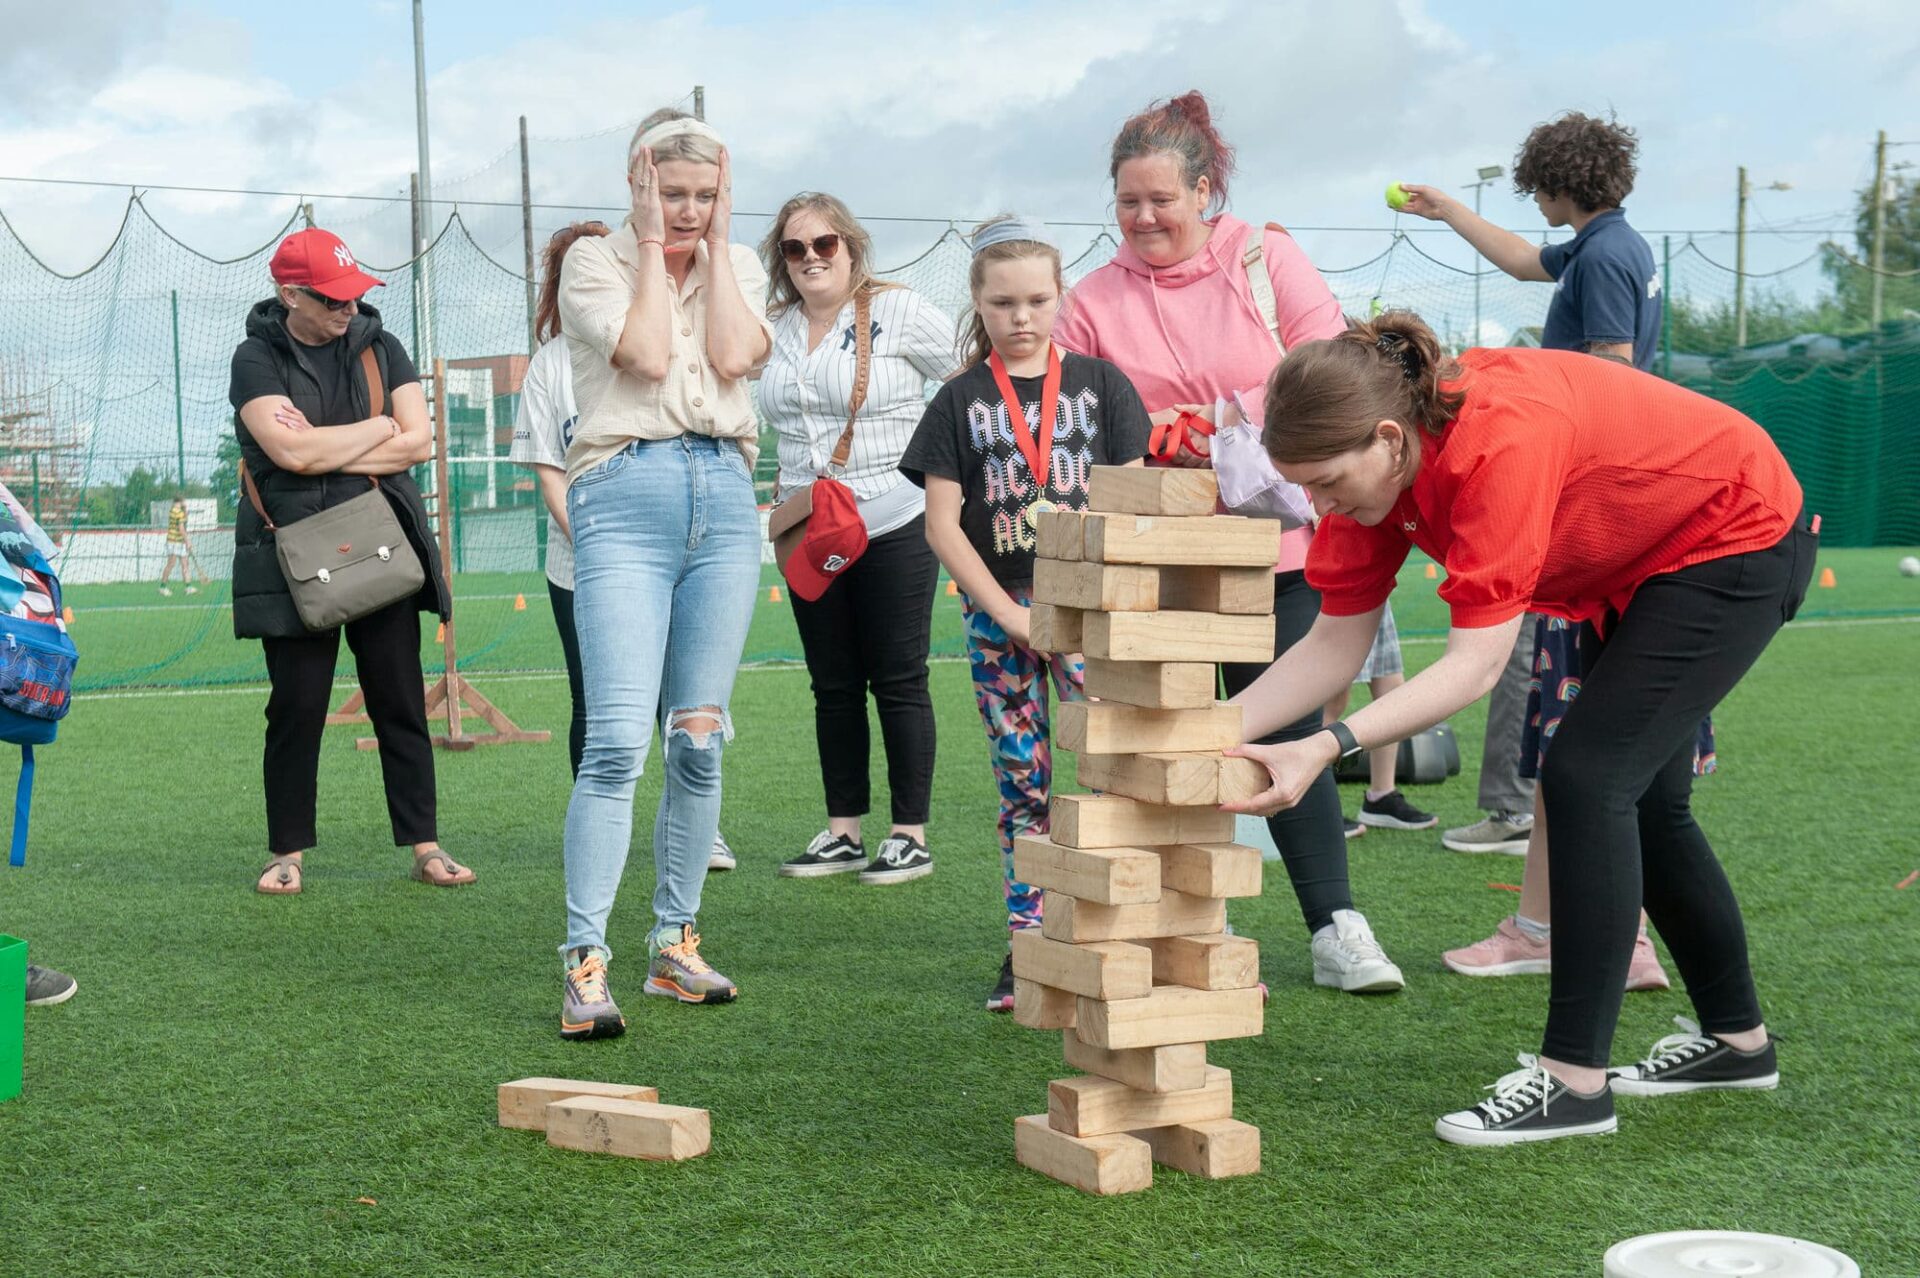 A group of Irish mothers are playing Giant Jenga game as part of a family fun day outdoor event in Cork